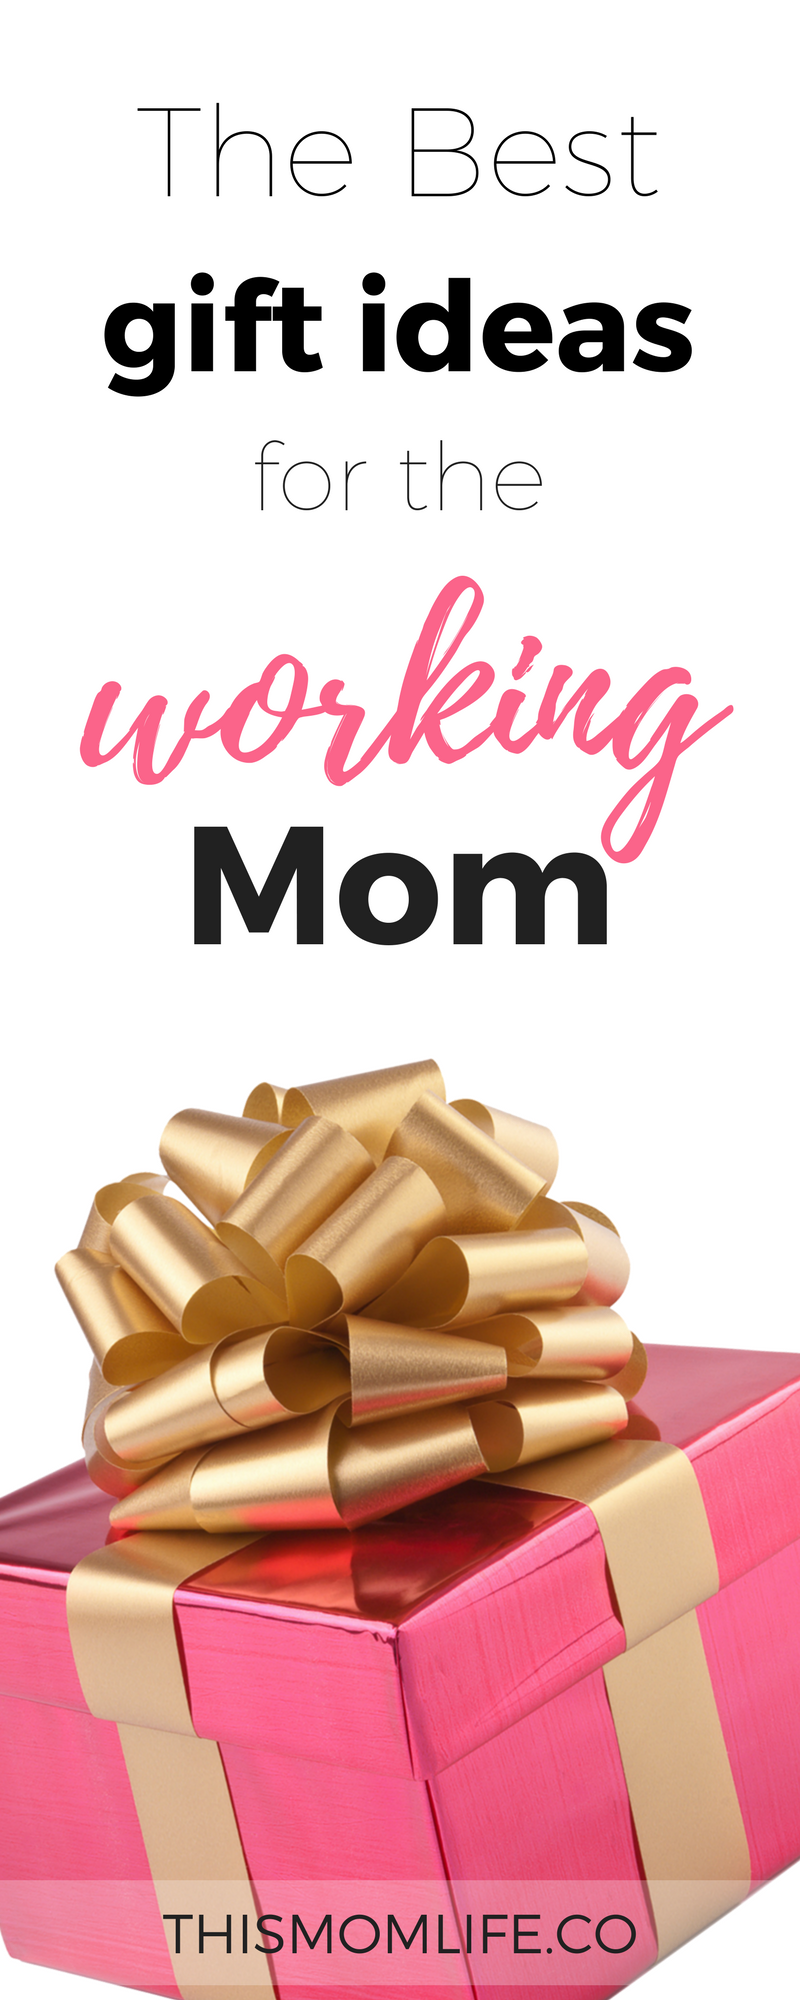 Busy Working Mom PNG-PlusPNG.